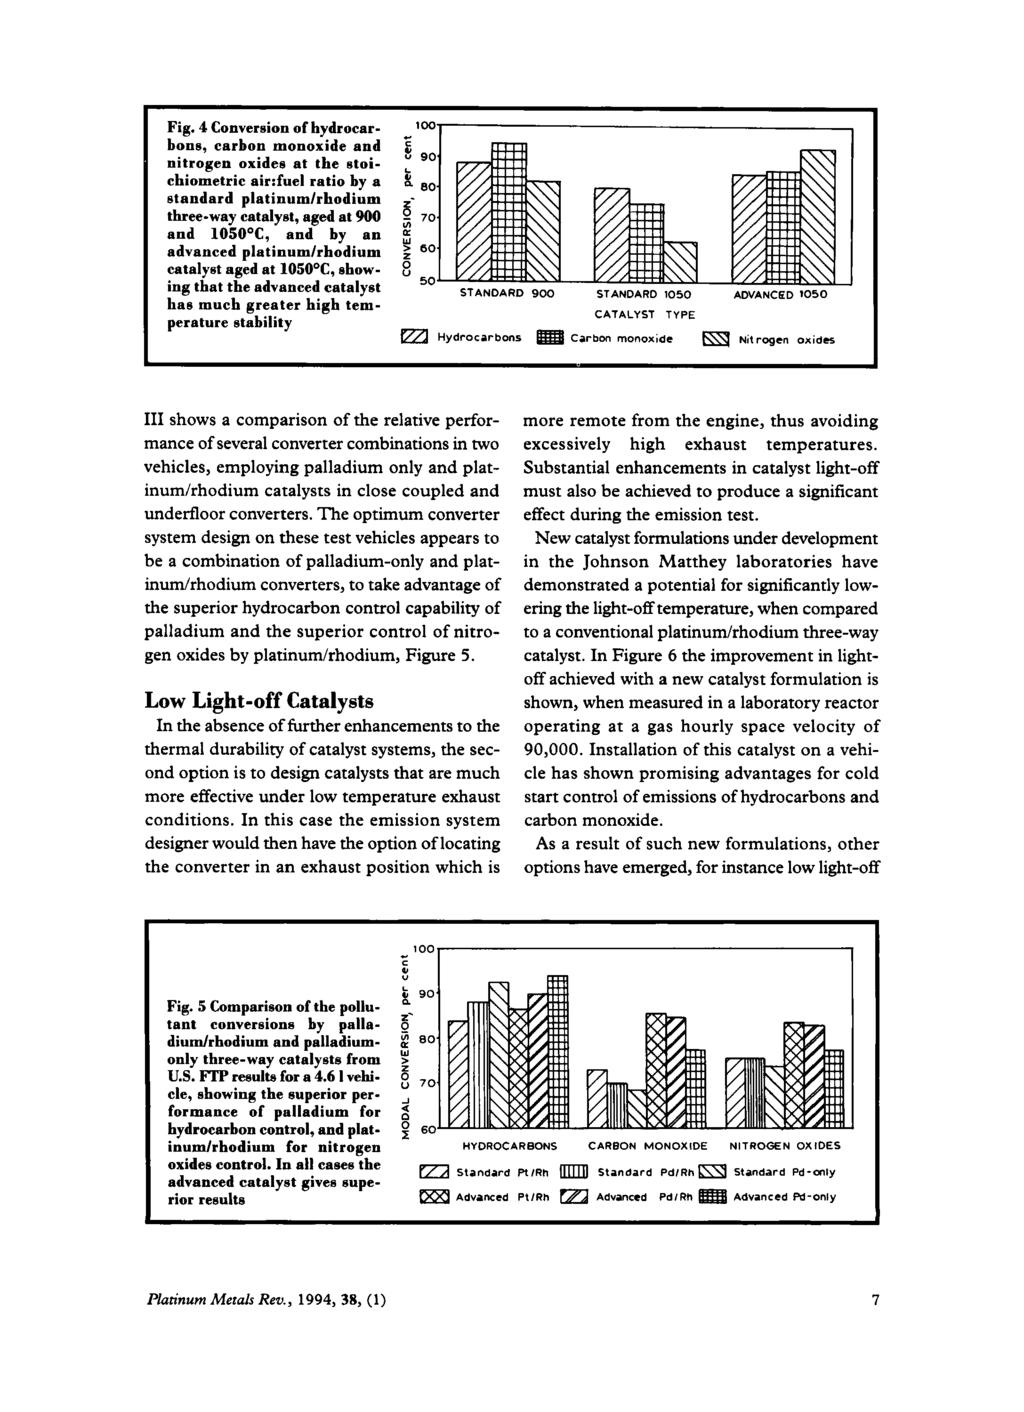 Fig. 4 Conversion of hydrocarbons, carbon monoxide and nitrogen oxides at the stoichiometric air:fuel ratio by a standard platinumlrhodium three-way catalyst, aged at 900 and 1050 C, and by an